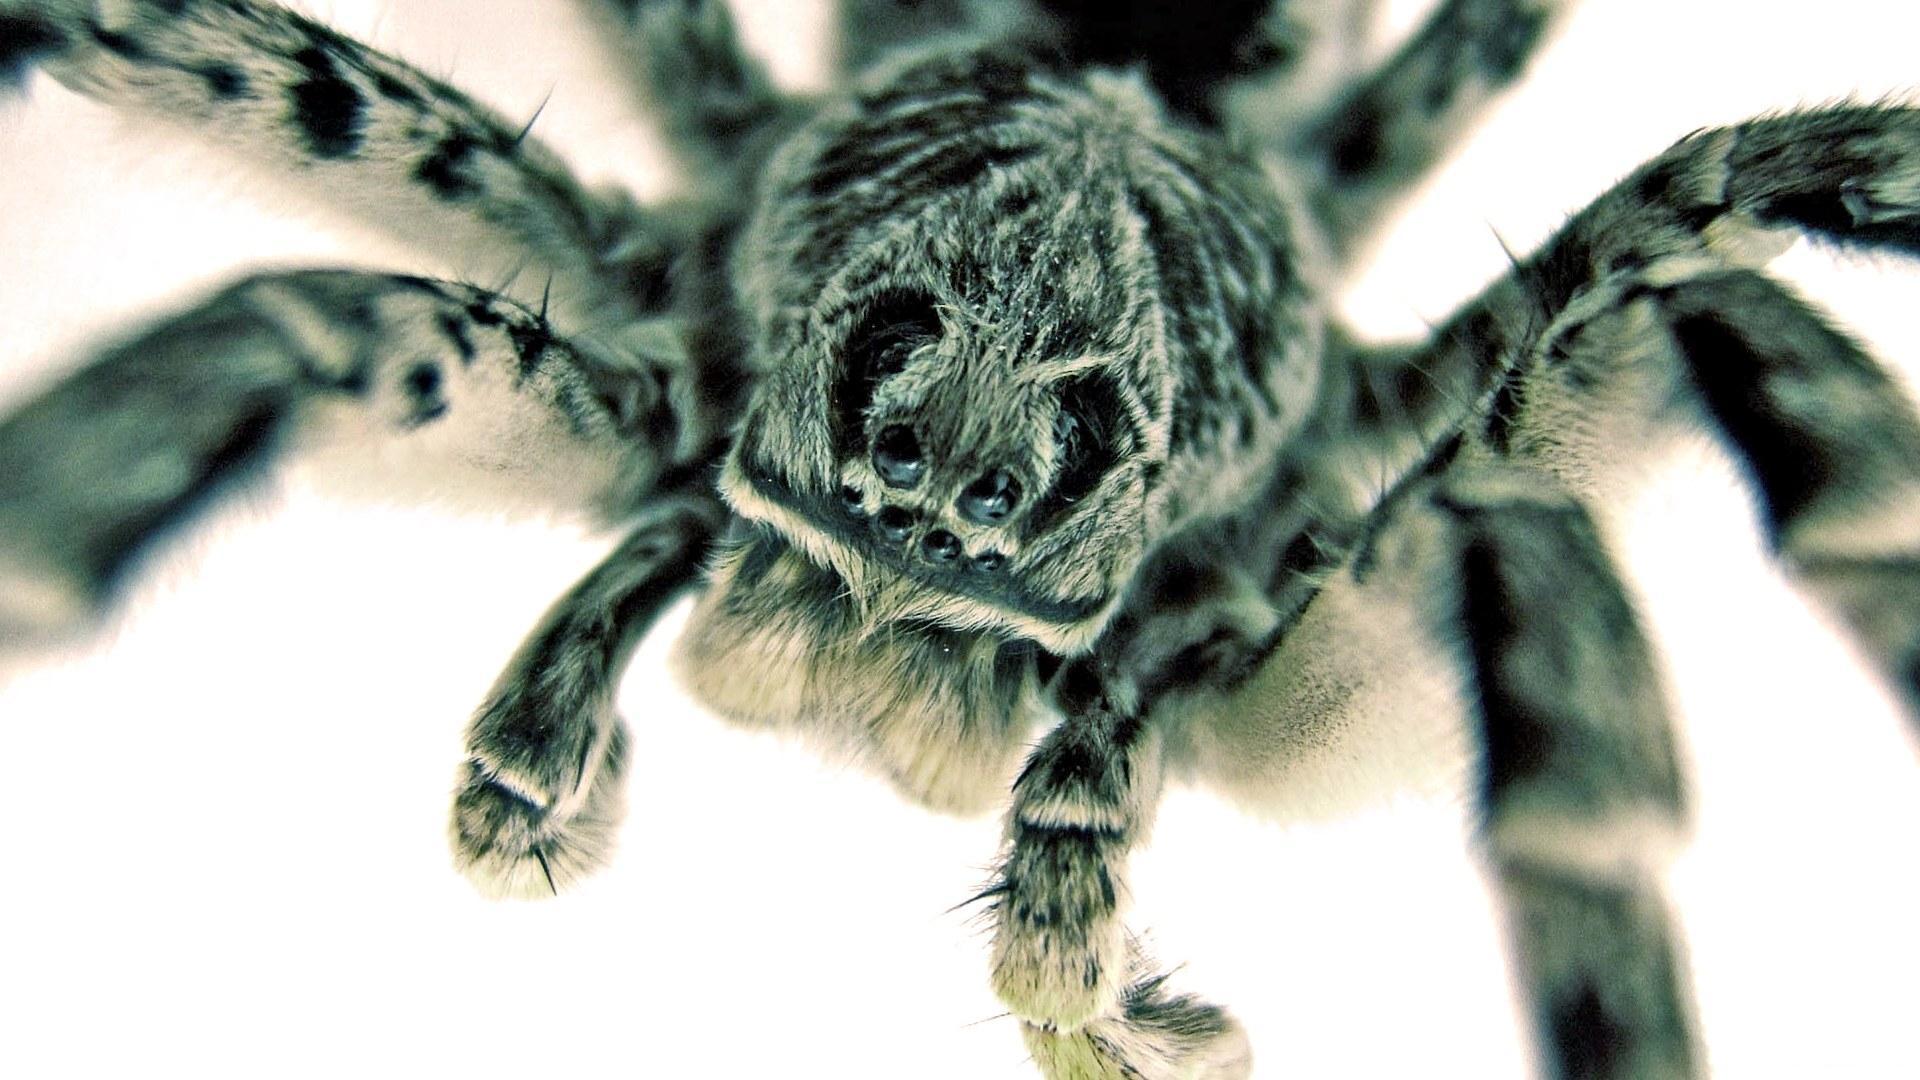 Wallpaper Eyes Spiders Jumping spider Animals Image Download